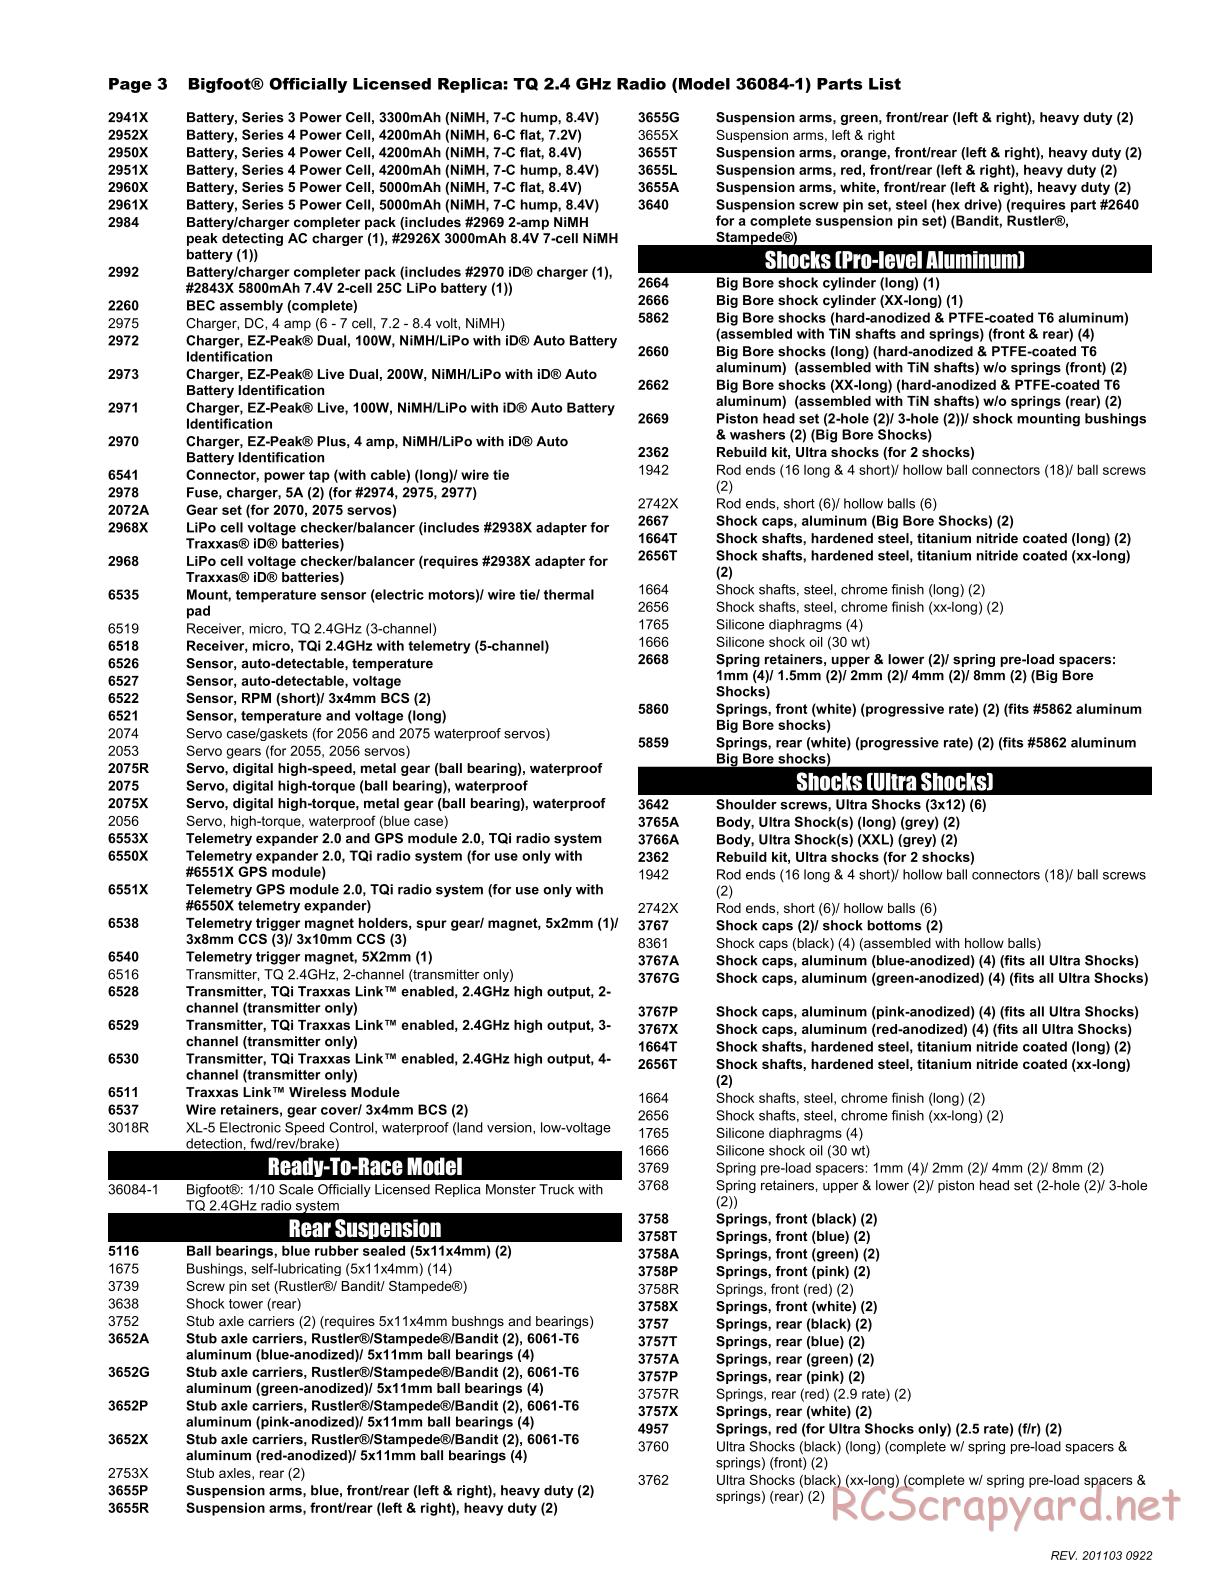 Traxxas - Bigfoot - Parts List - Page 3